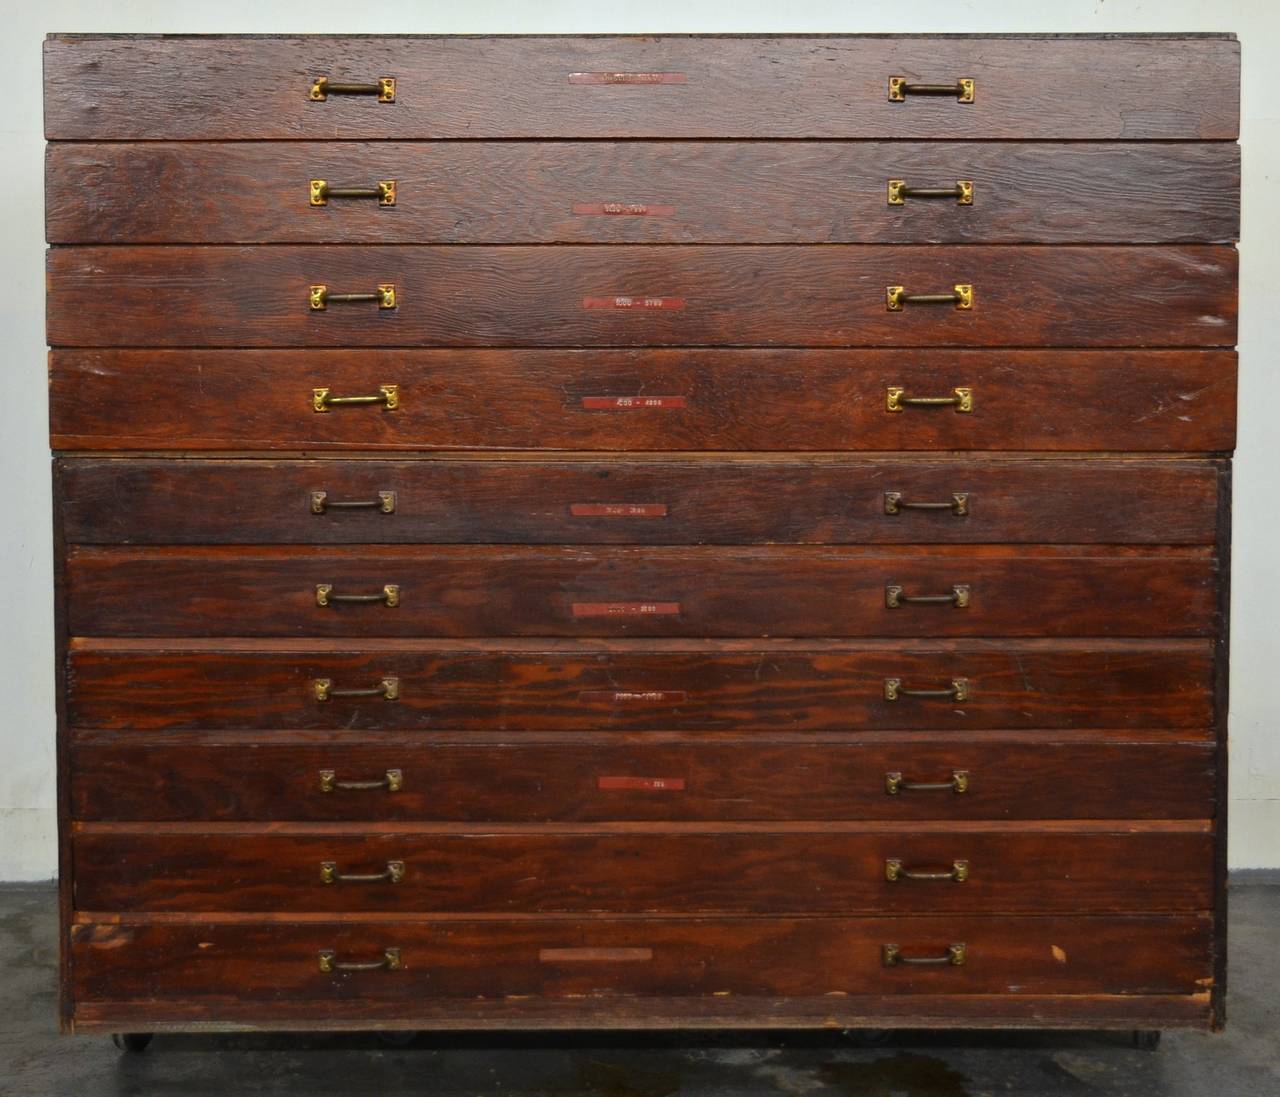 Fabulous flat file with warm stained wood and brass hardware. Authentic style and function for storing architectural drawings, art or maps. Composed of two parts that stack on top of each other with one part having six drawers and the other having